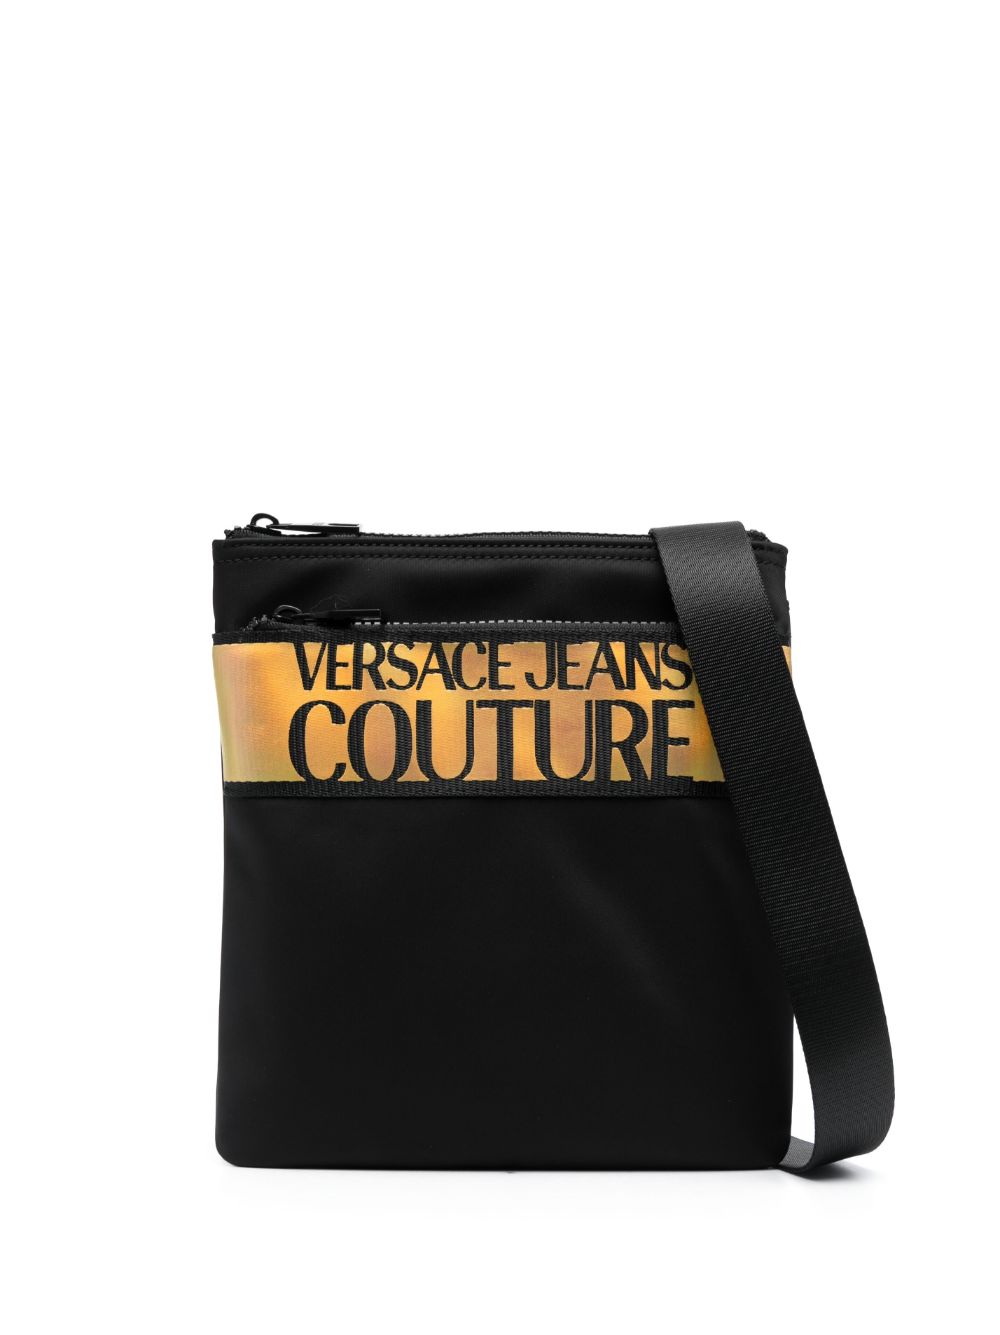 Versace Jeans Couture logo-print zip-fastening shoulder bag - Black von Versace Jeans Couture